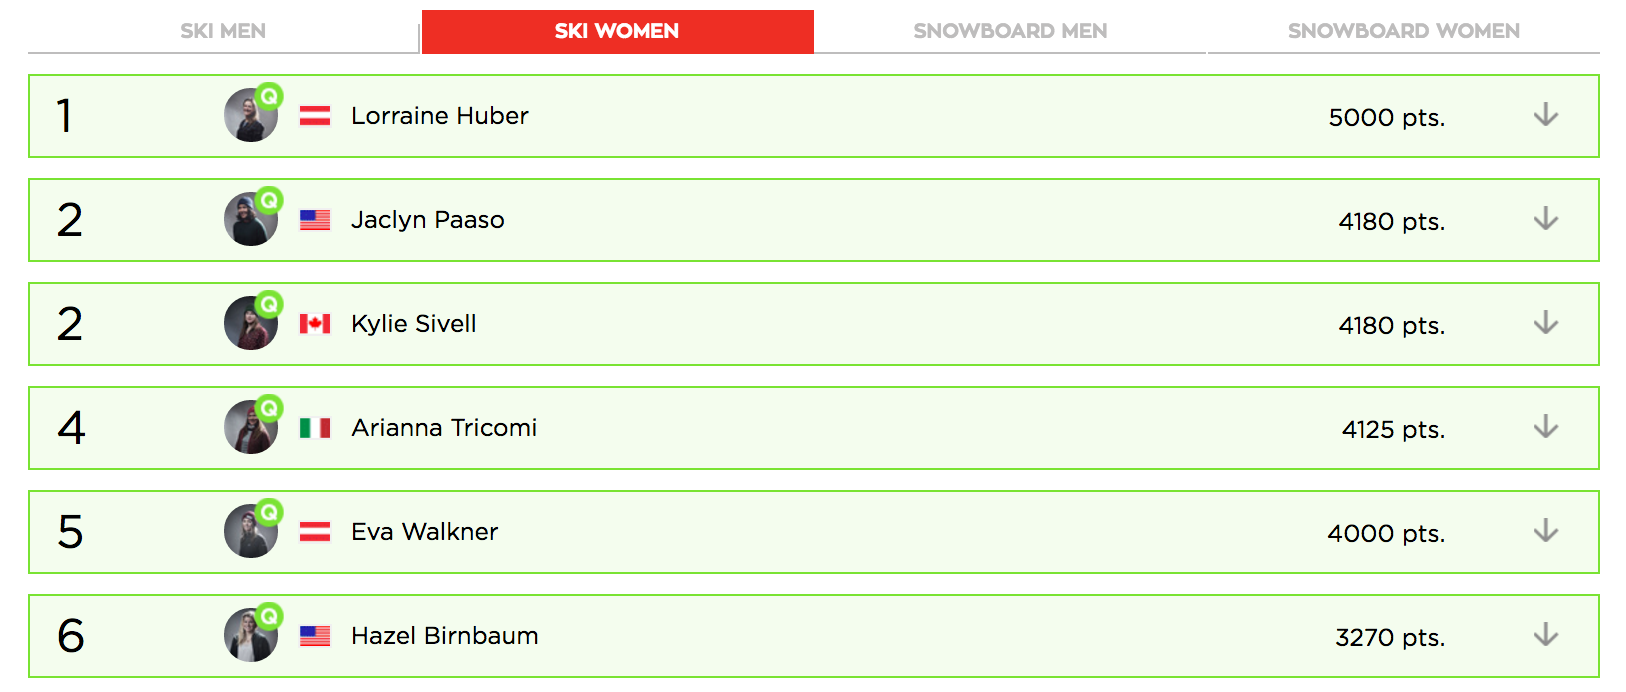 Qualified Ski Women for Freeride World Tour 2017 Alaska and further stops